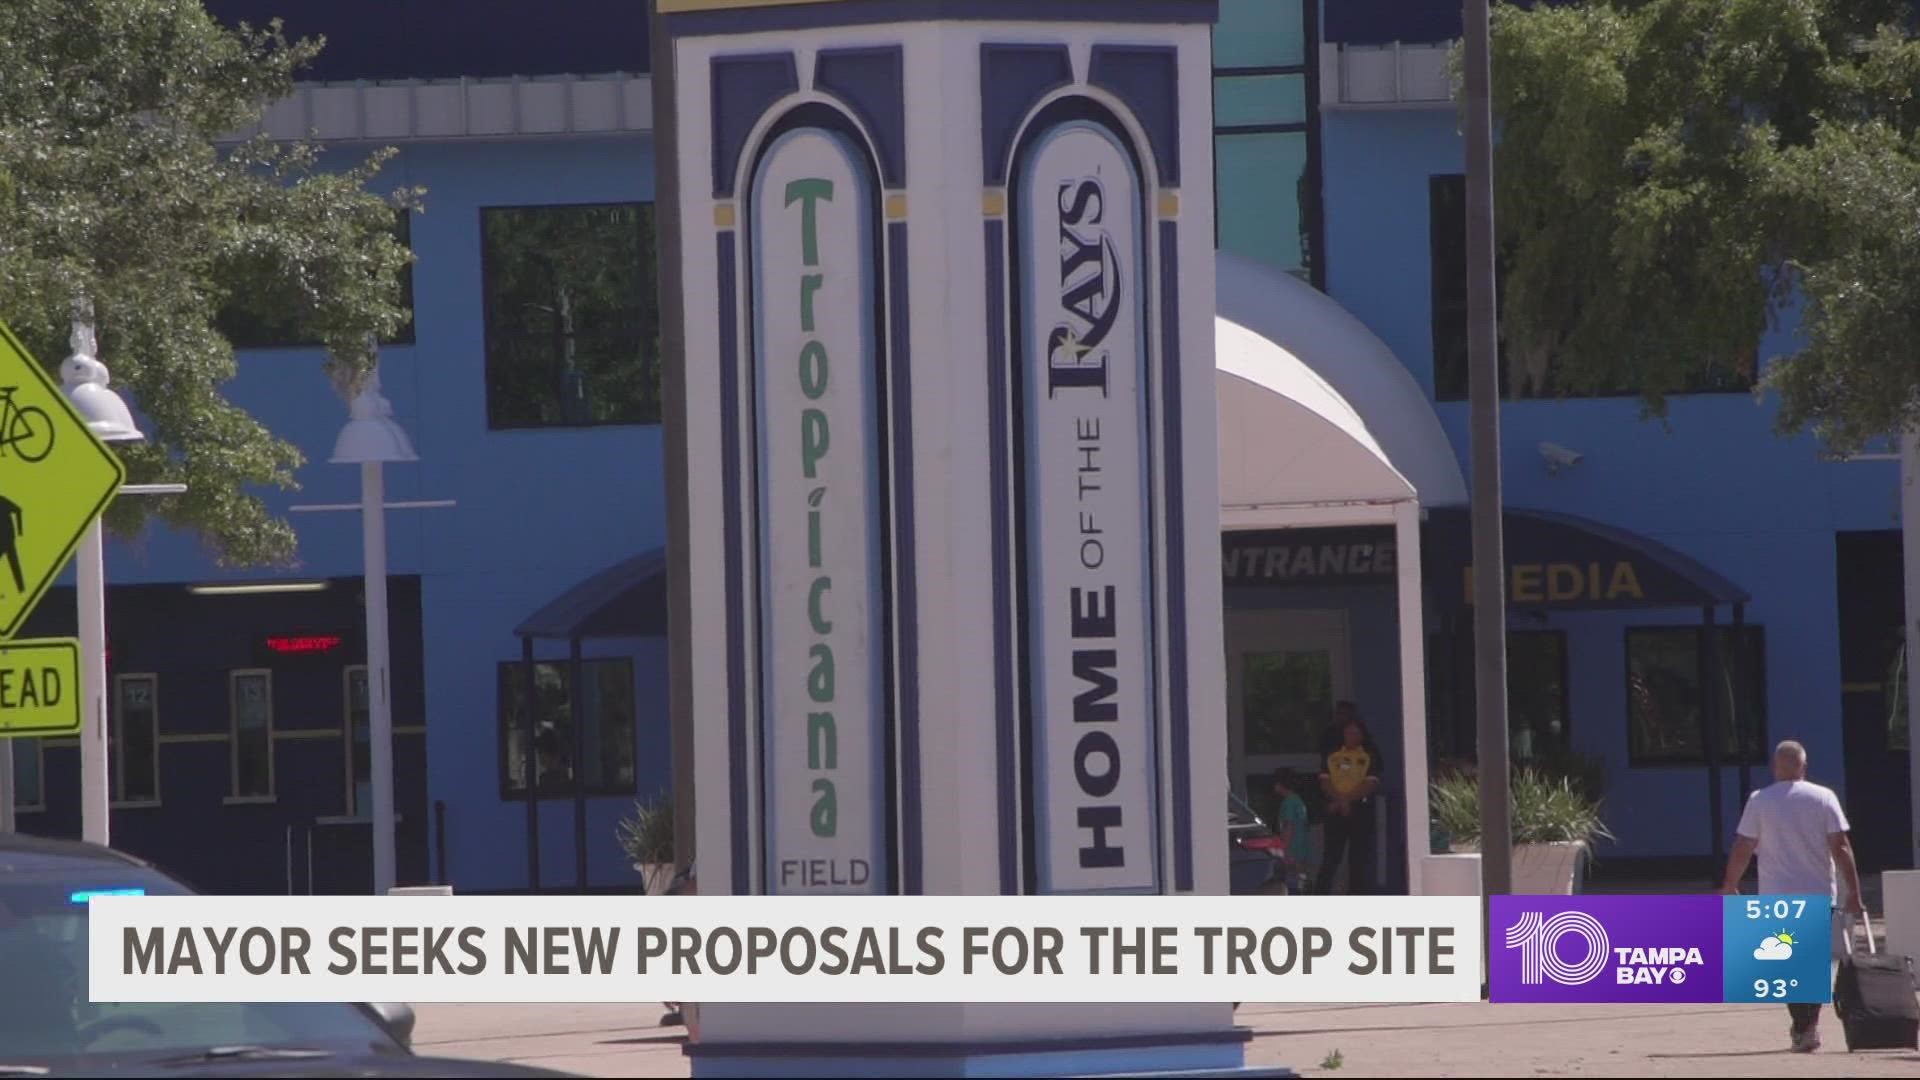 The mayor will request new developer proposals that will be expected to include plans for a "state-of-the-art" Rays ballpark.